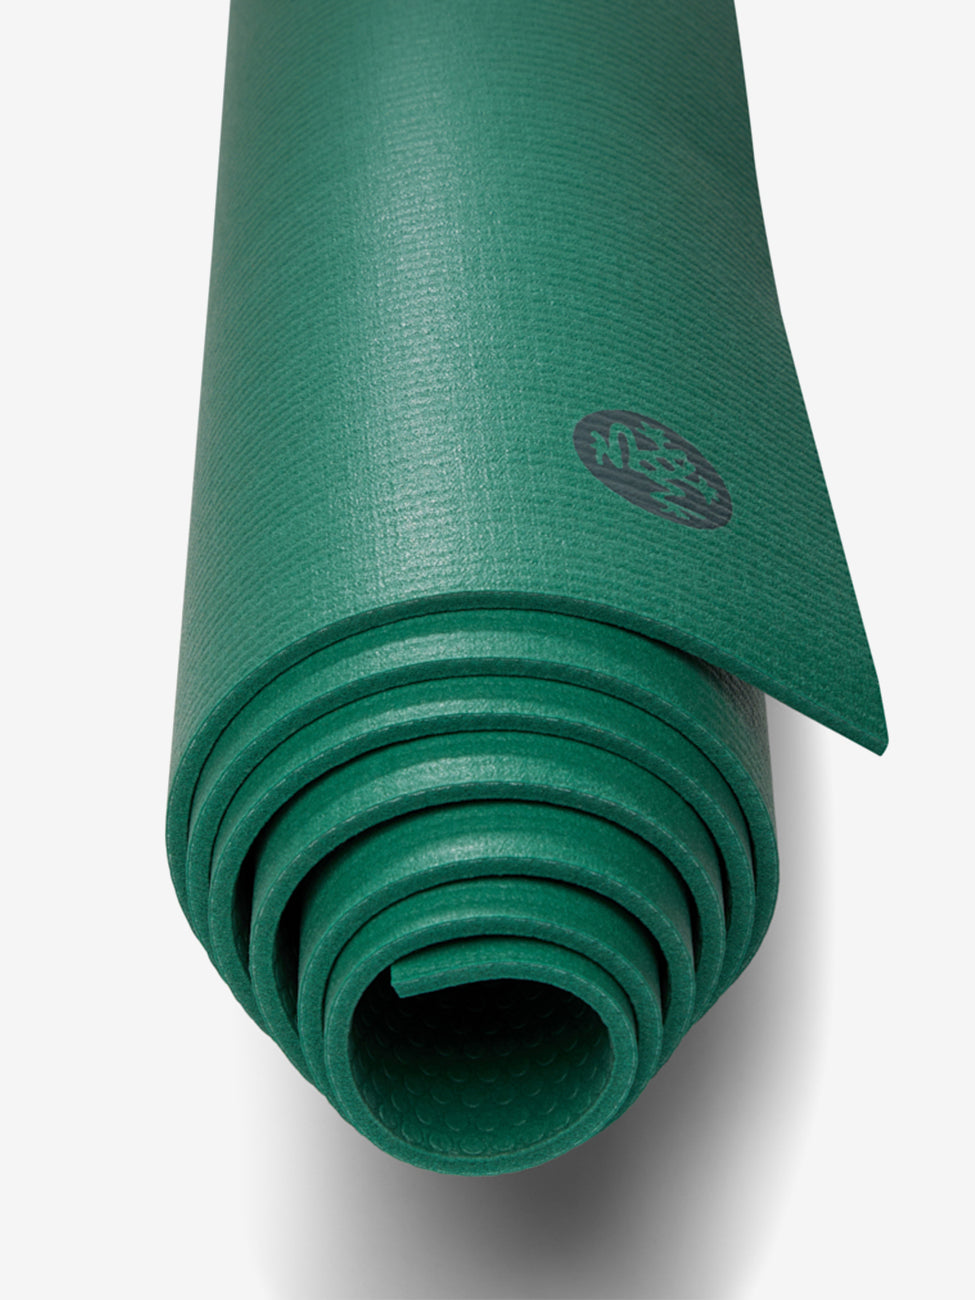 Green yoga mat partially unrolled with textured surface, side view, visible logo